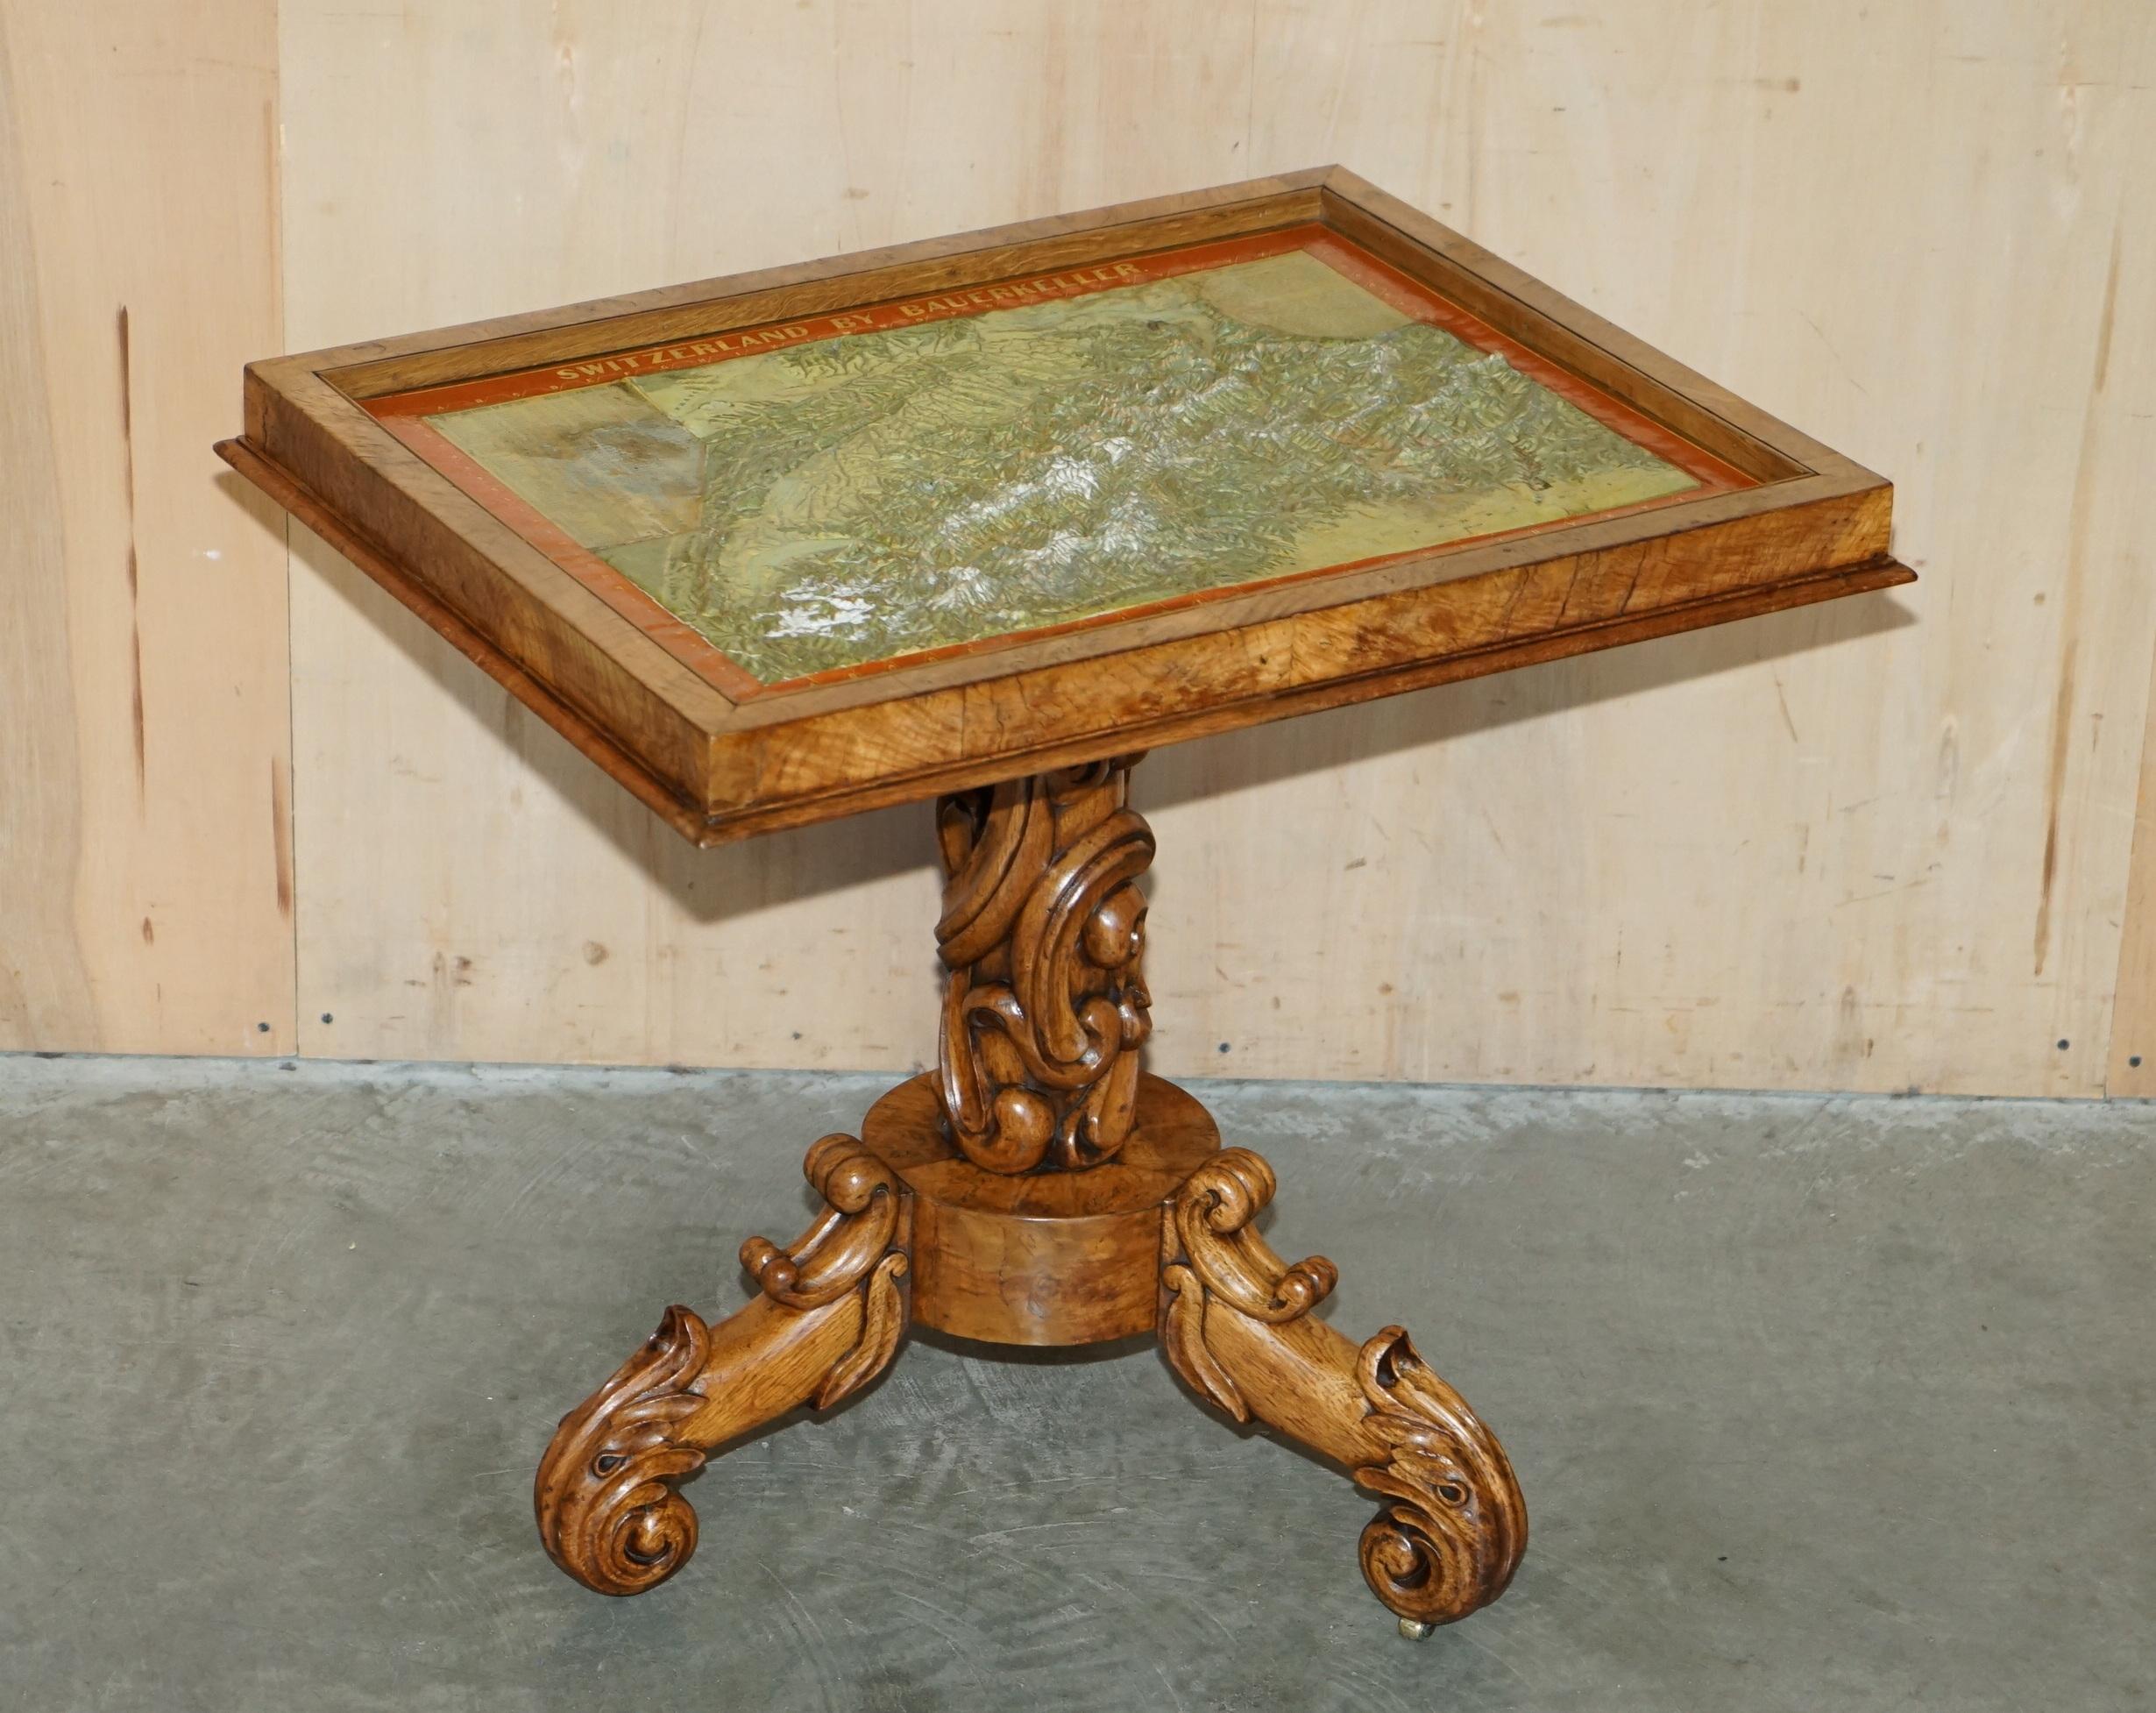 CIRCA 1850 MALBY & CO MAP OF SWiTZERLAND BY BAUERKELLER BURR WALNUT CHESS TABLE For Sale 6